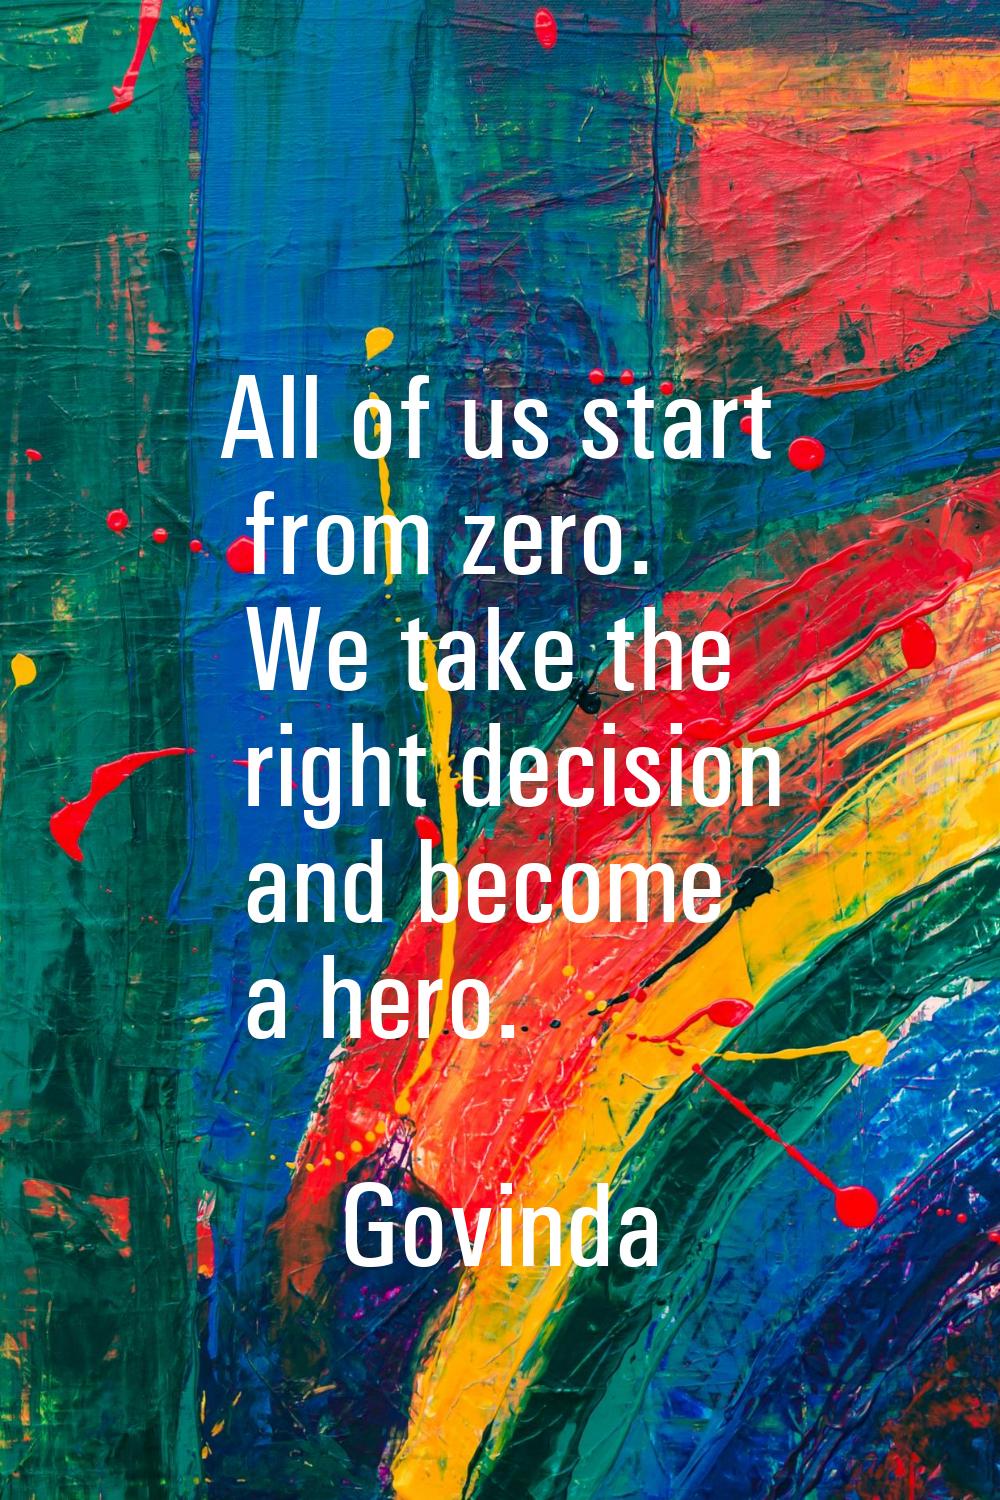 All of us start from zero. We take the right decision and become a hero.